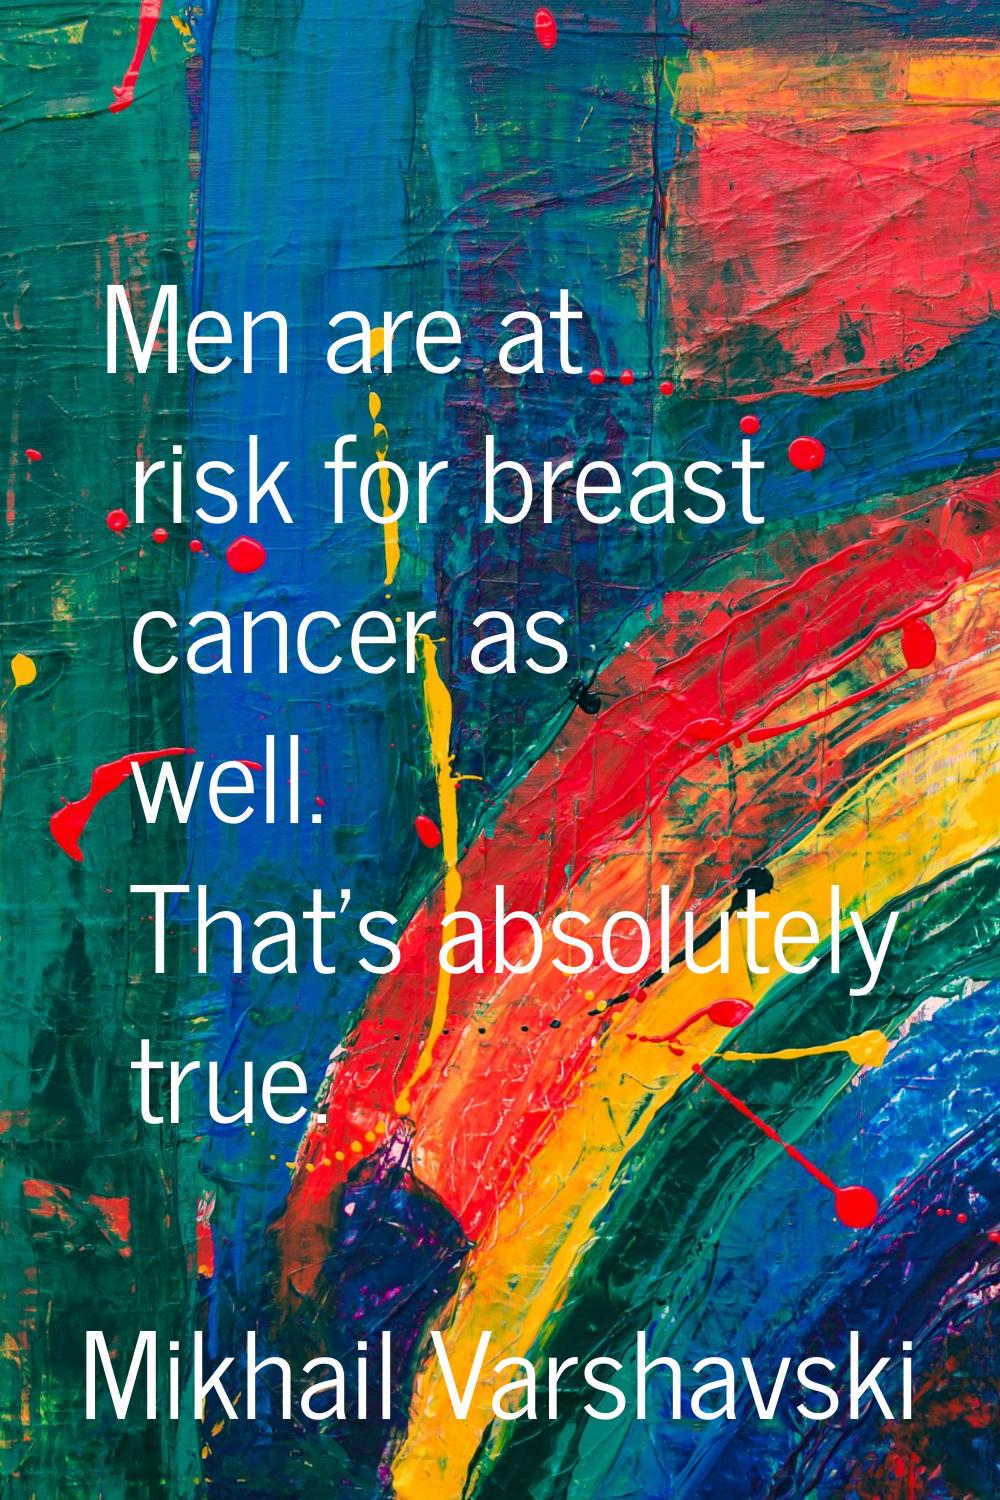 Men are at risk for breast cancer as well. That's absolutely true.